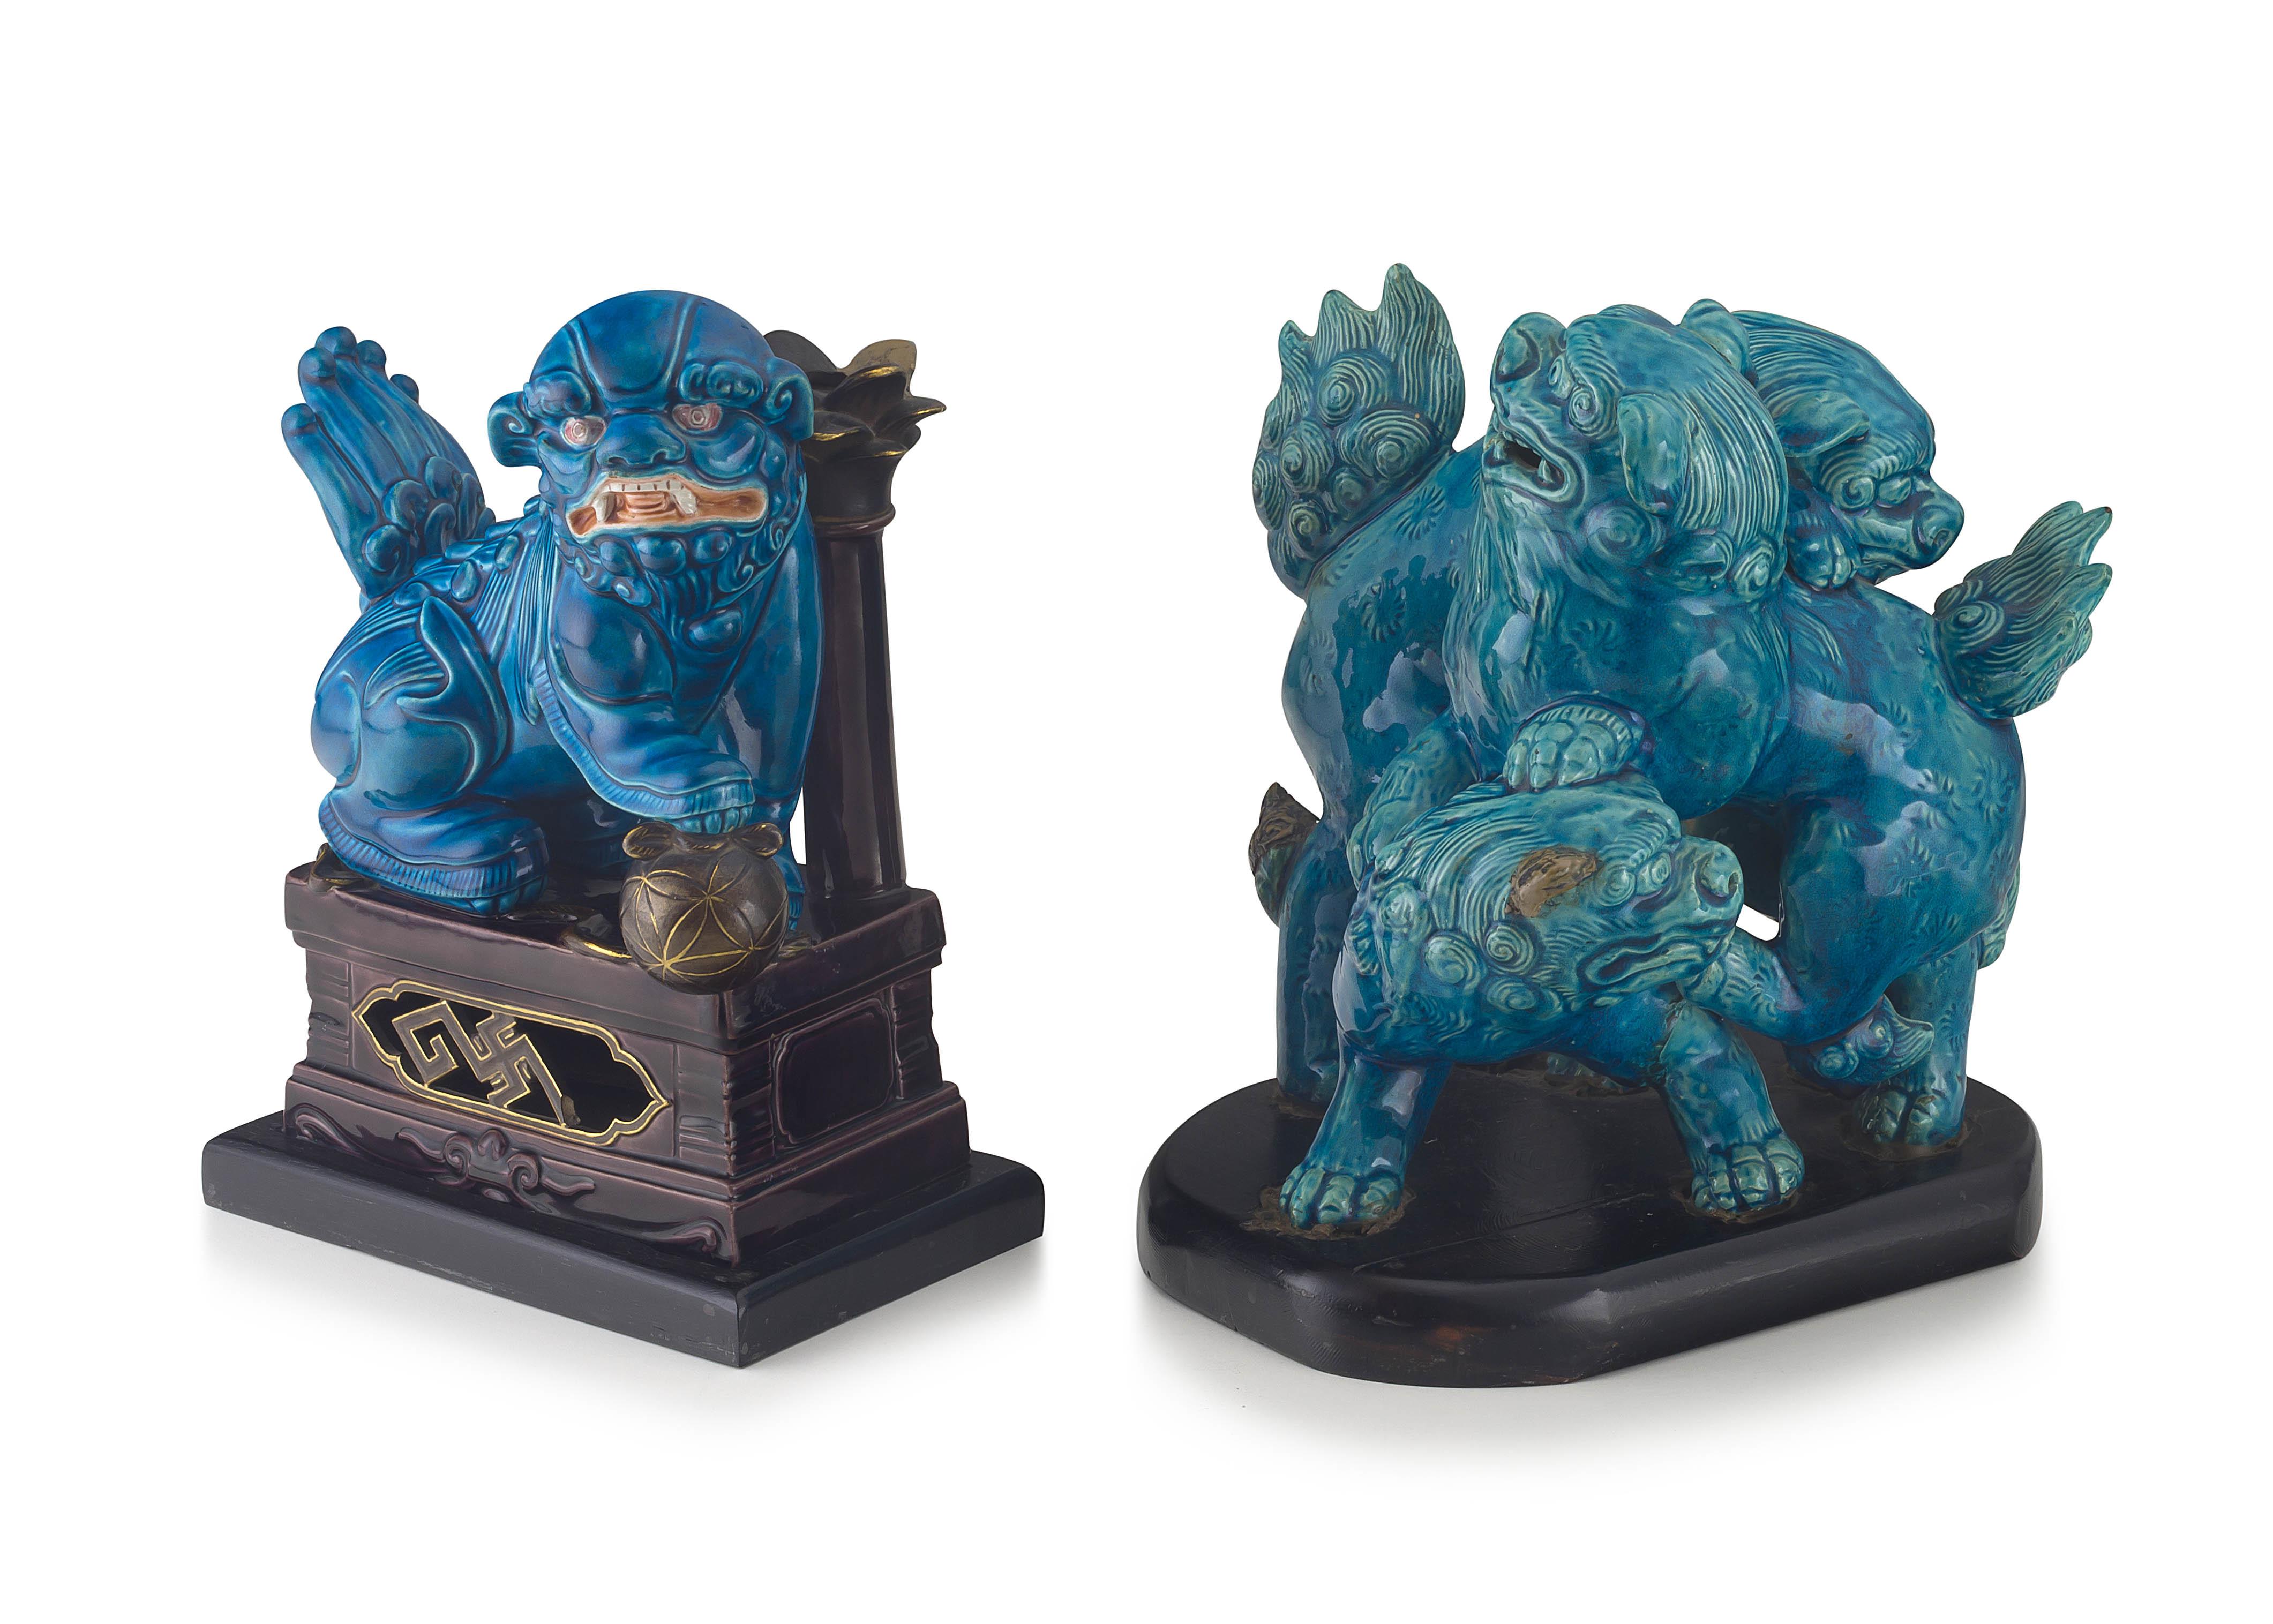 A Chinese turquoise-glazed figural group of contesting dog-of-fo, late 19th/early 20th century